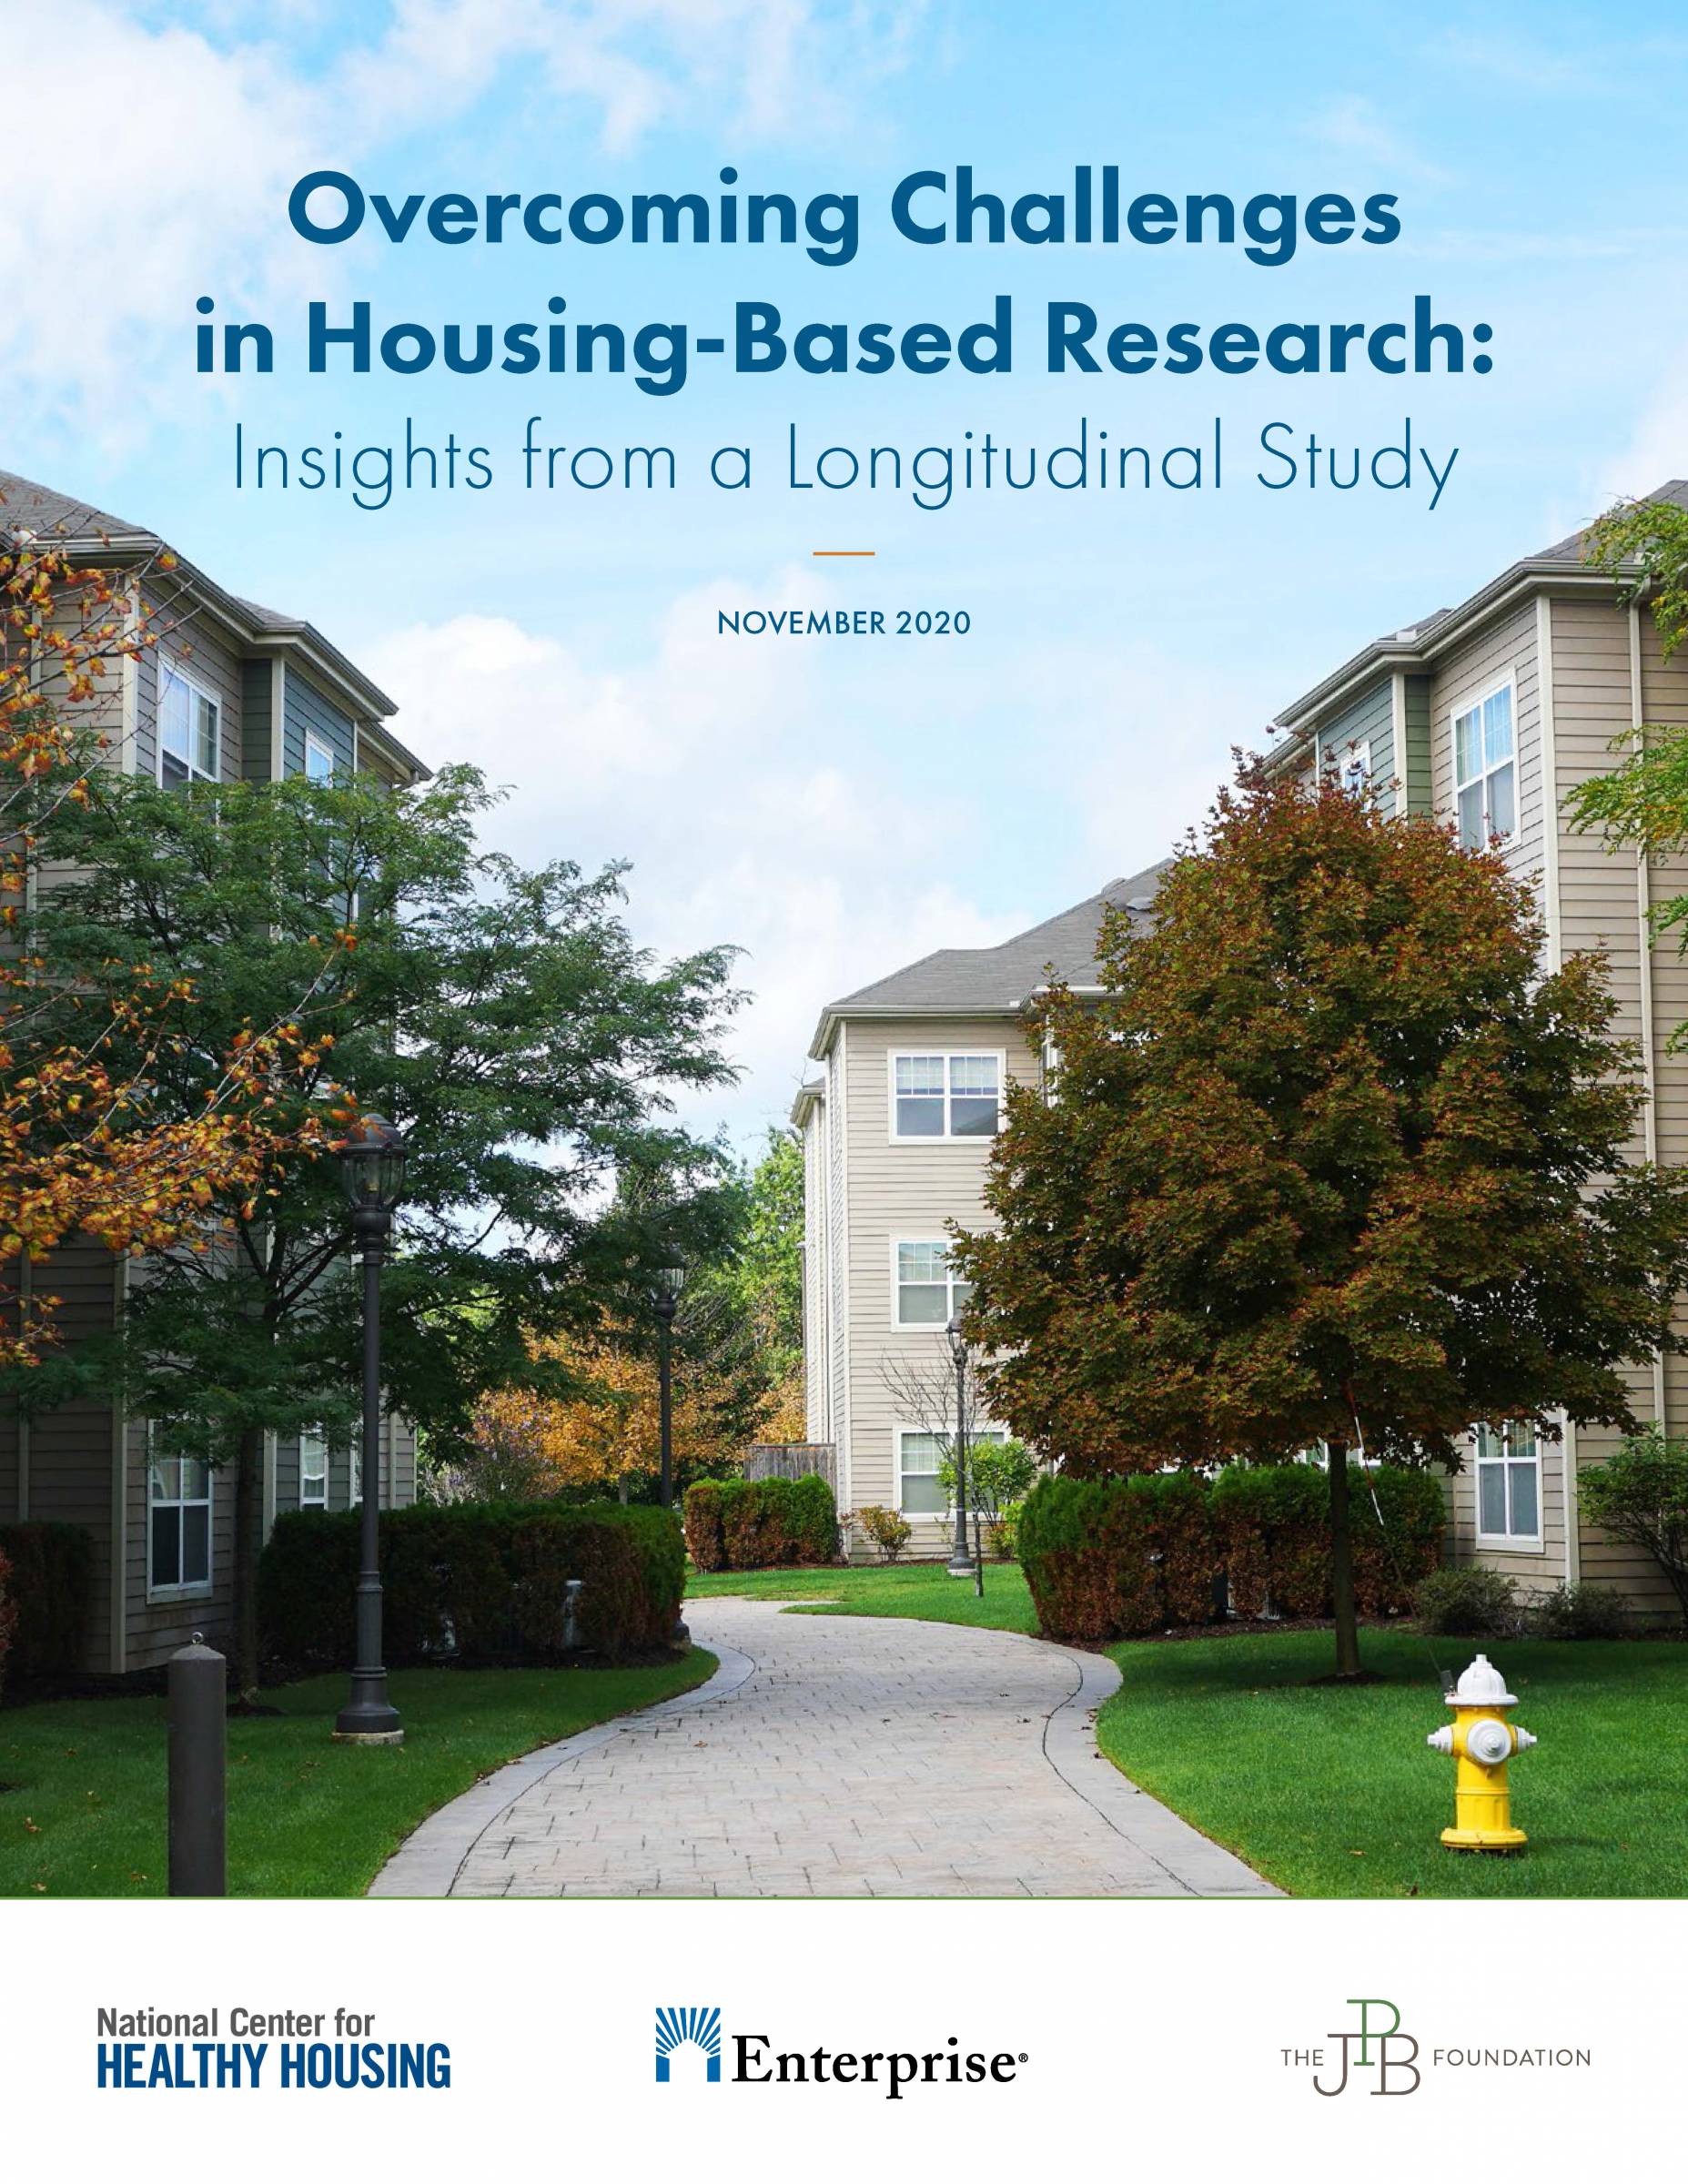 Overcoming Challenges in Housing-Based Research: Insights from a Longitudinal Study